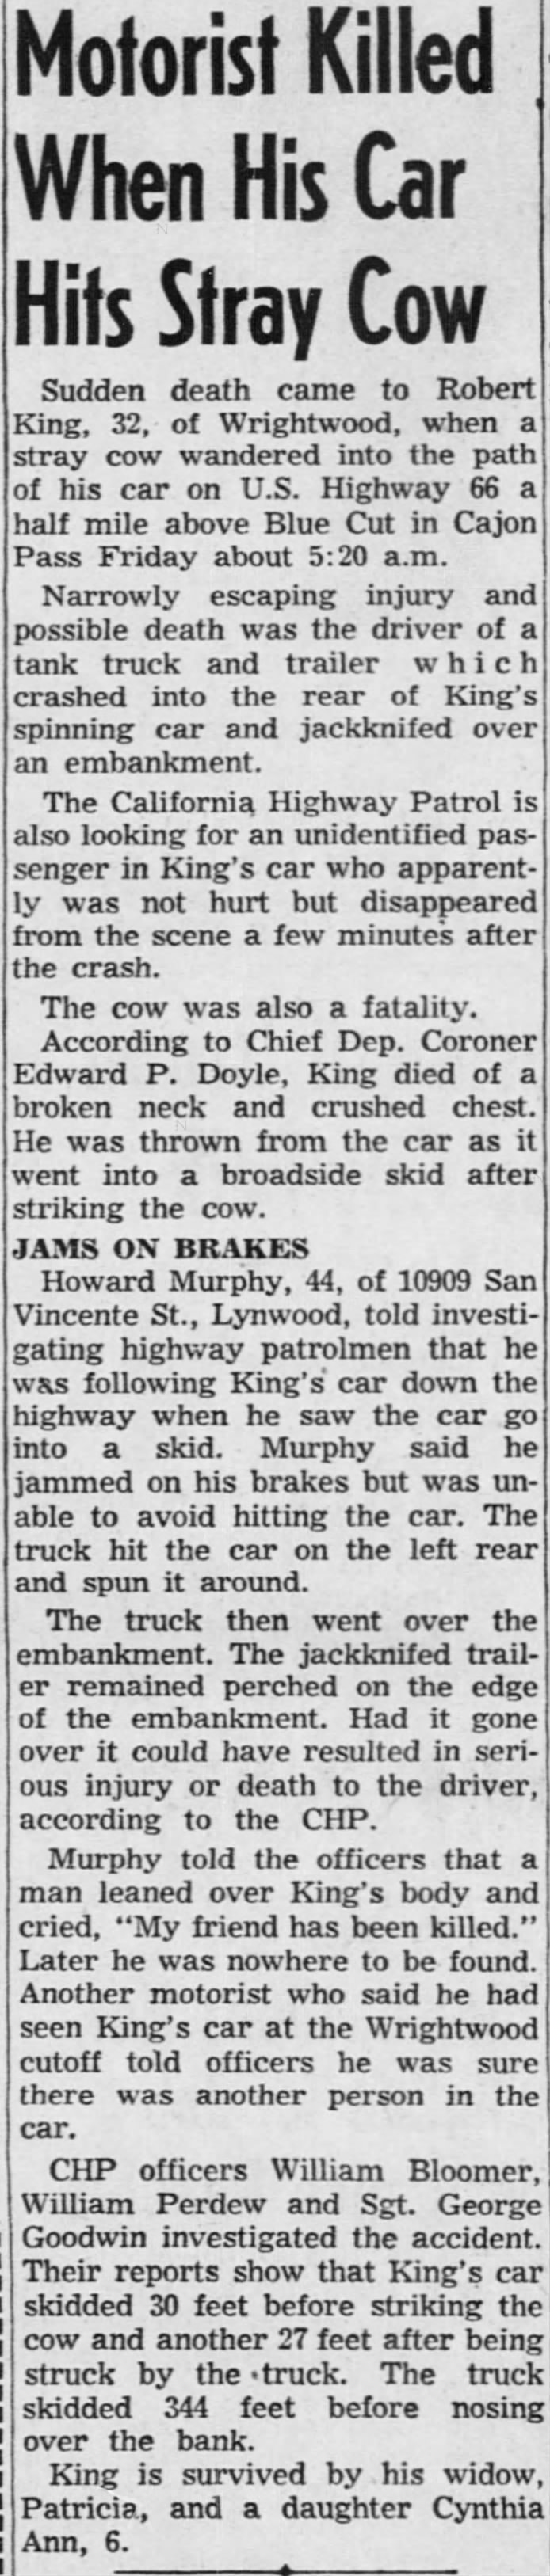 Howard Murphy, in car accident